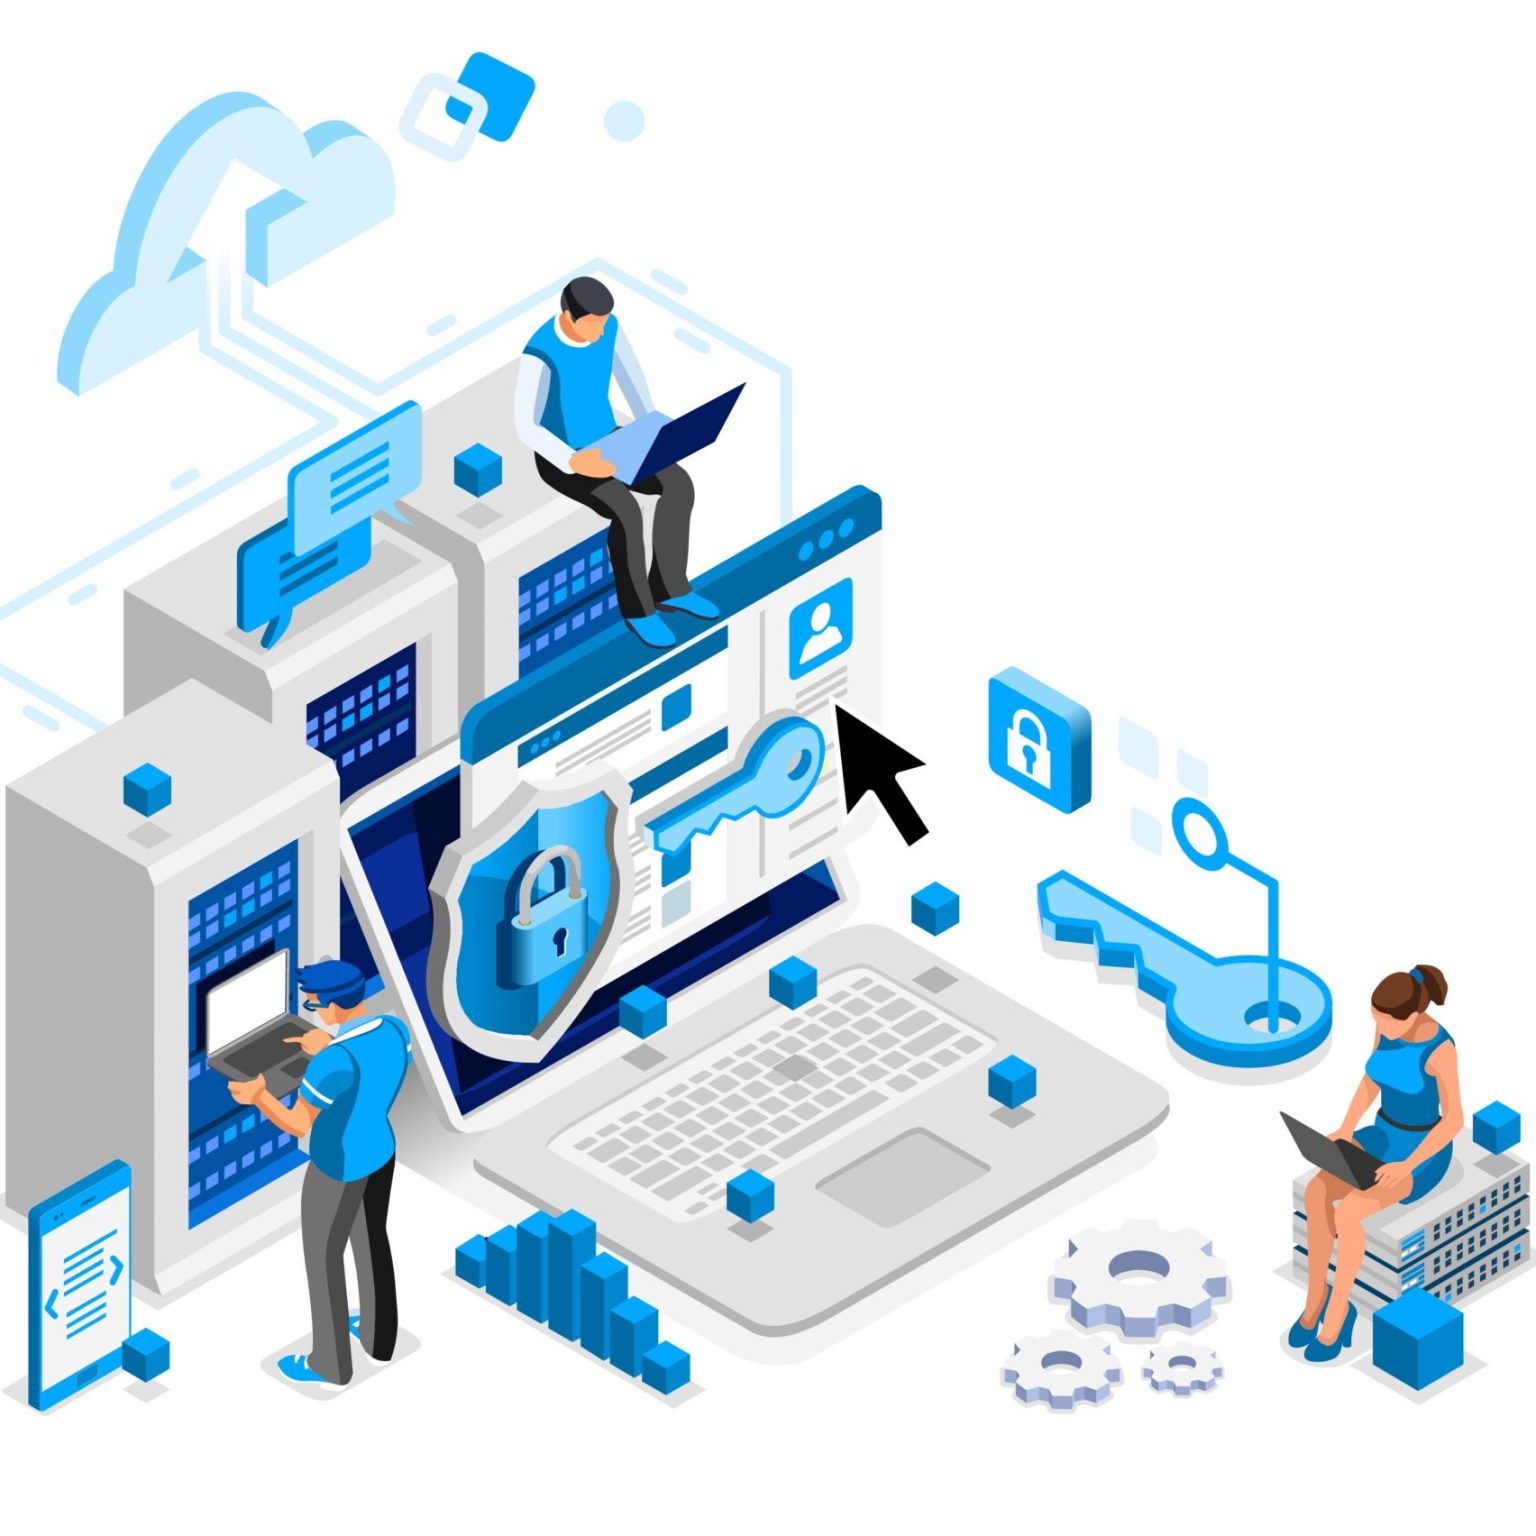 Online administrator, web hosting concept. Technician repair software. Hardware protection share infographic. Store safe server concept. Characters and text images, flat isometric vector illustration